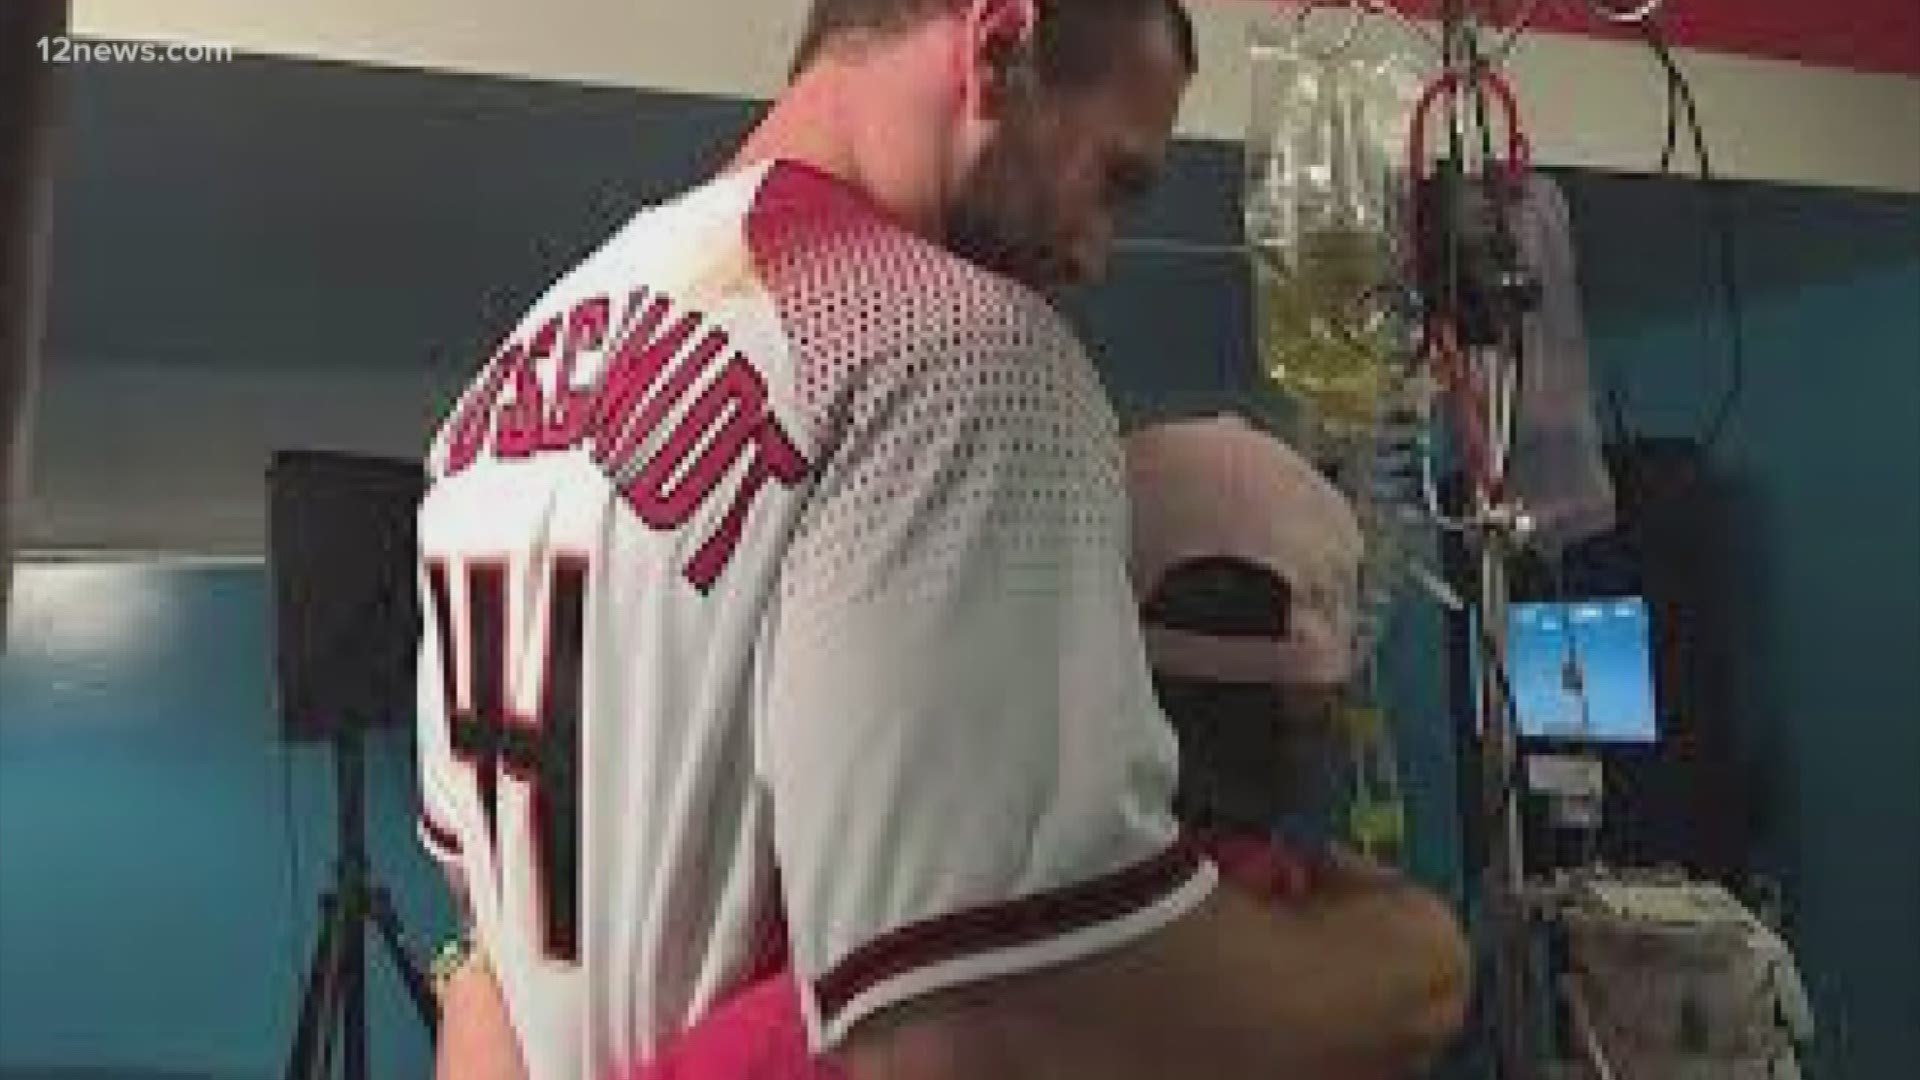 Usually Paul Goldschmidt is getting recognition for his work on the field, now he is being recognized for his work off the field. Goldy is up for "Man of the Year" for his philanthropic work with Phoenix Children's Hospital.